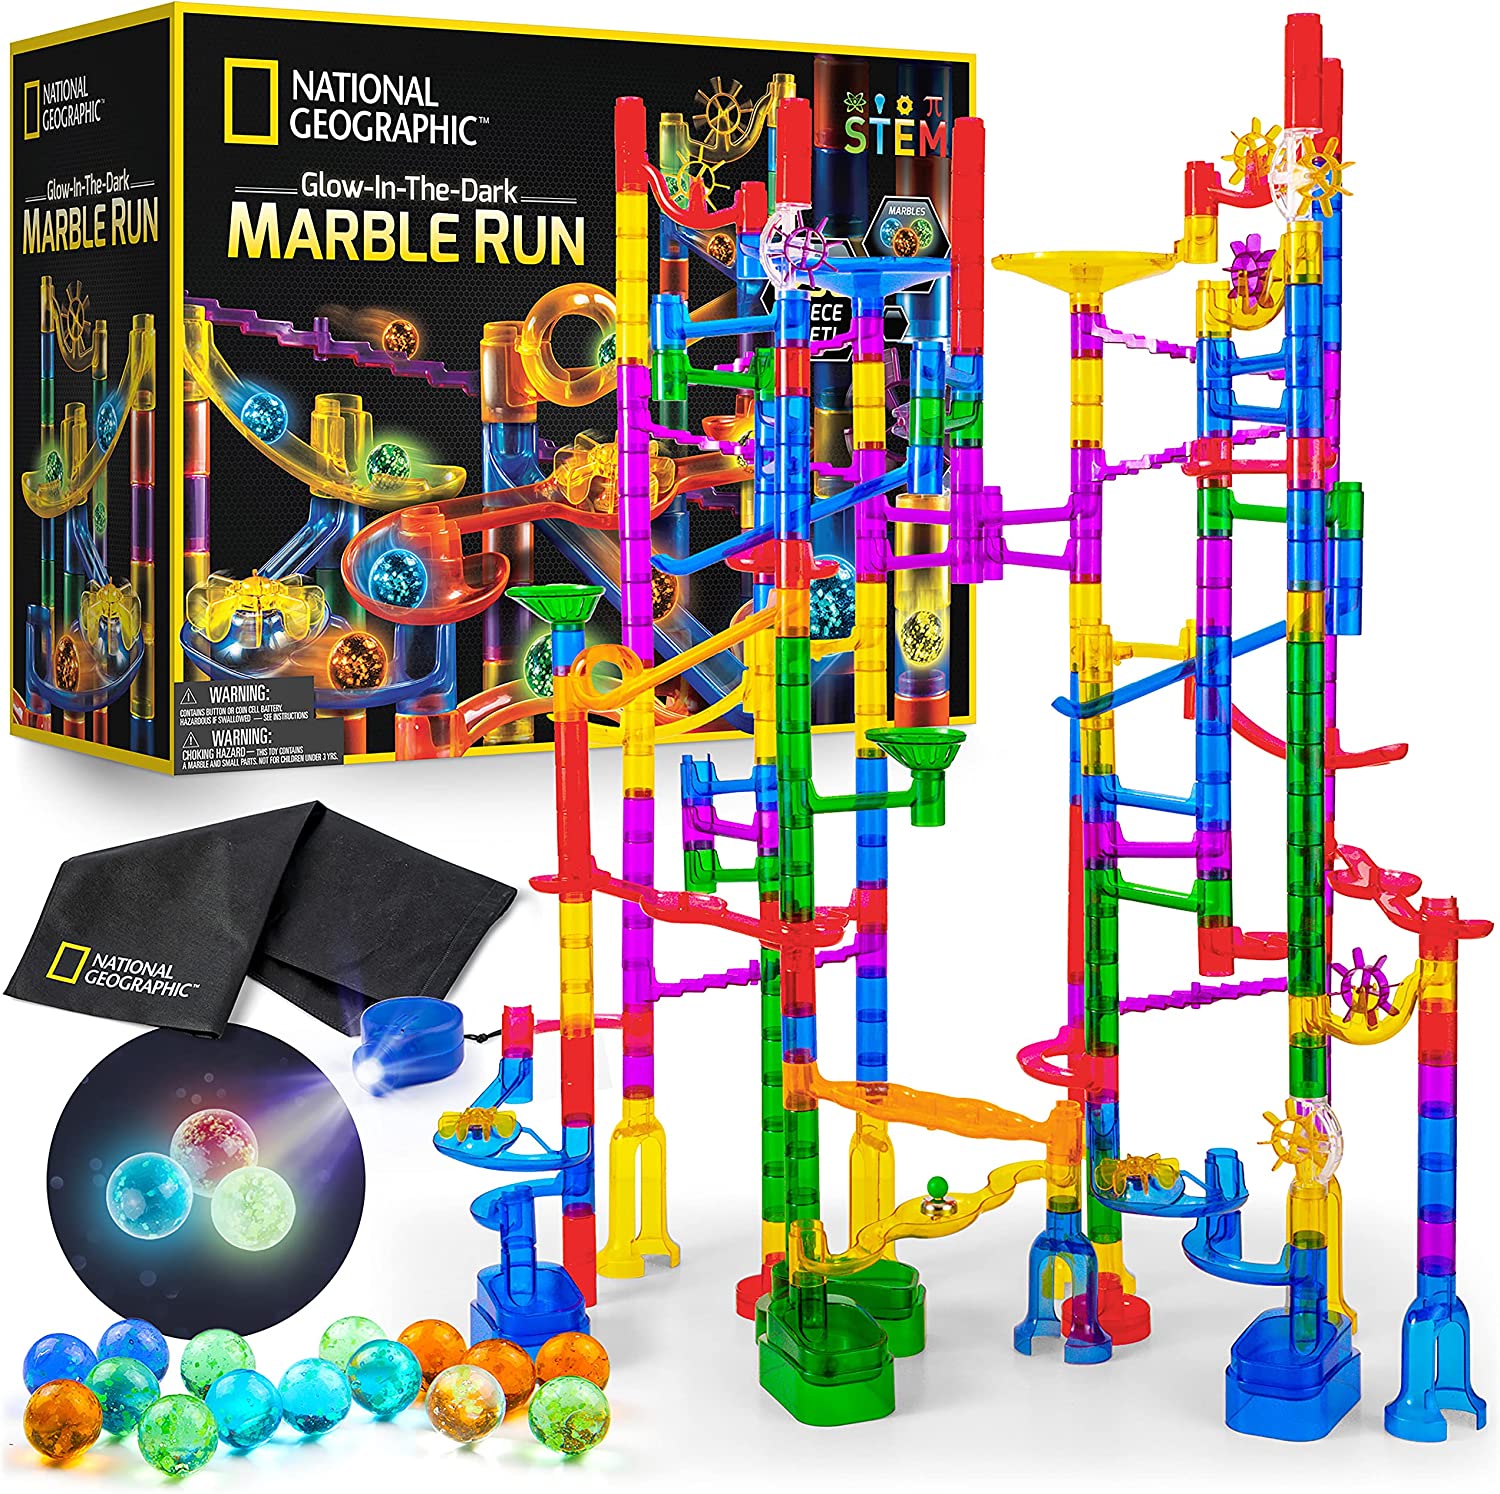 NATIONAL GEOGRAPHIC Glowing Marble Run – 250 Piece